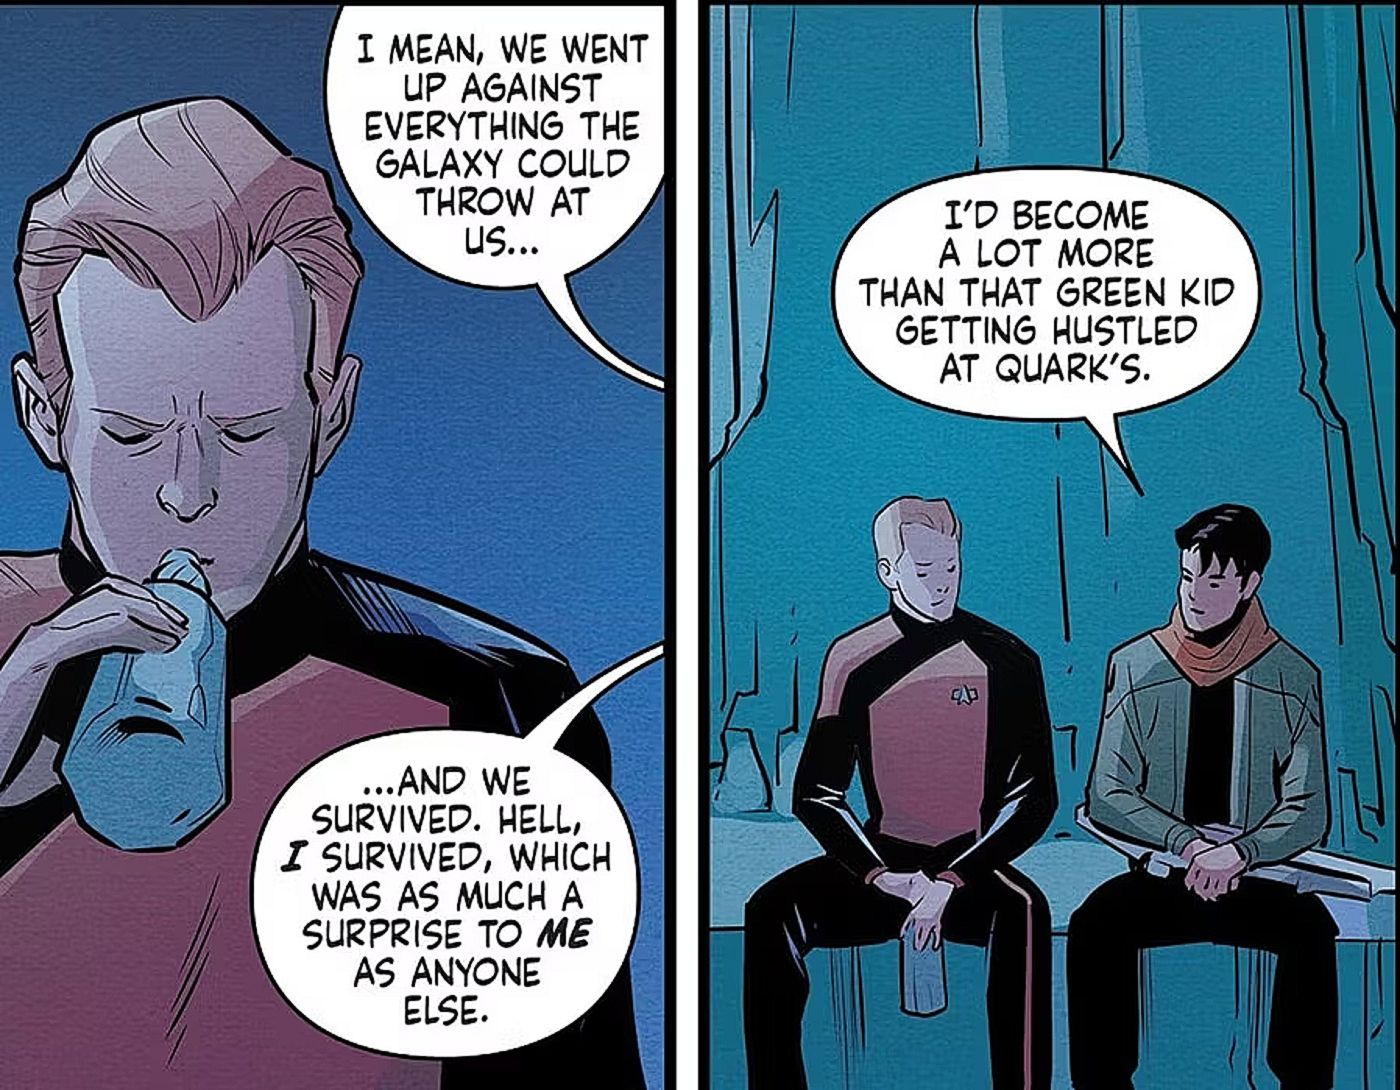 Star Trek #13, Tom Paris and Harry KIm drink and reminisce about their Voyager days